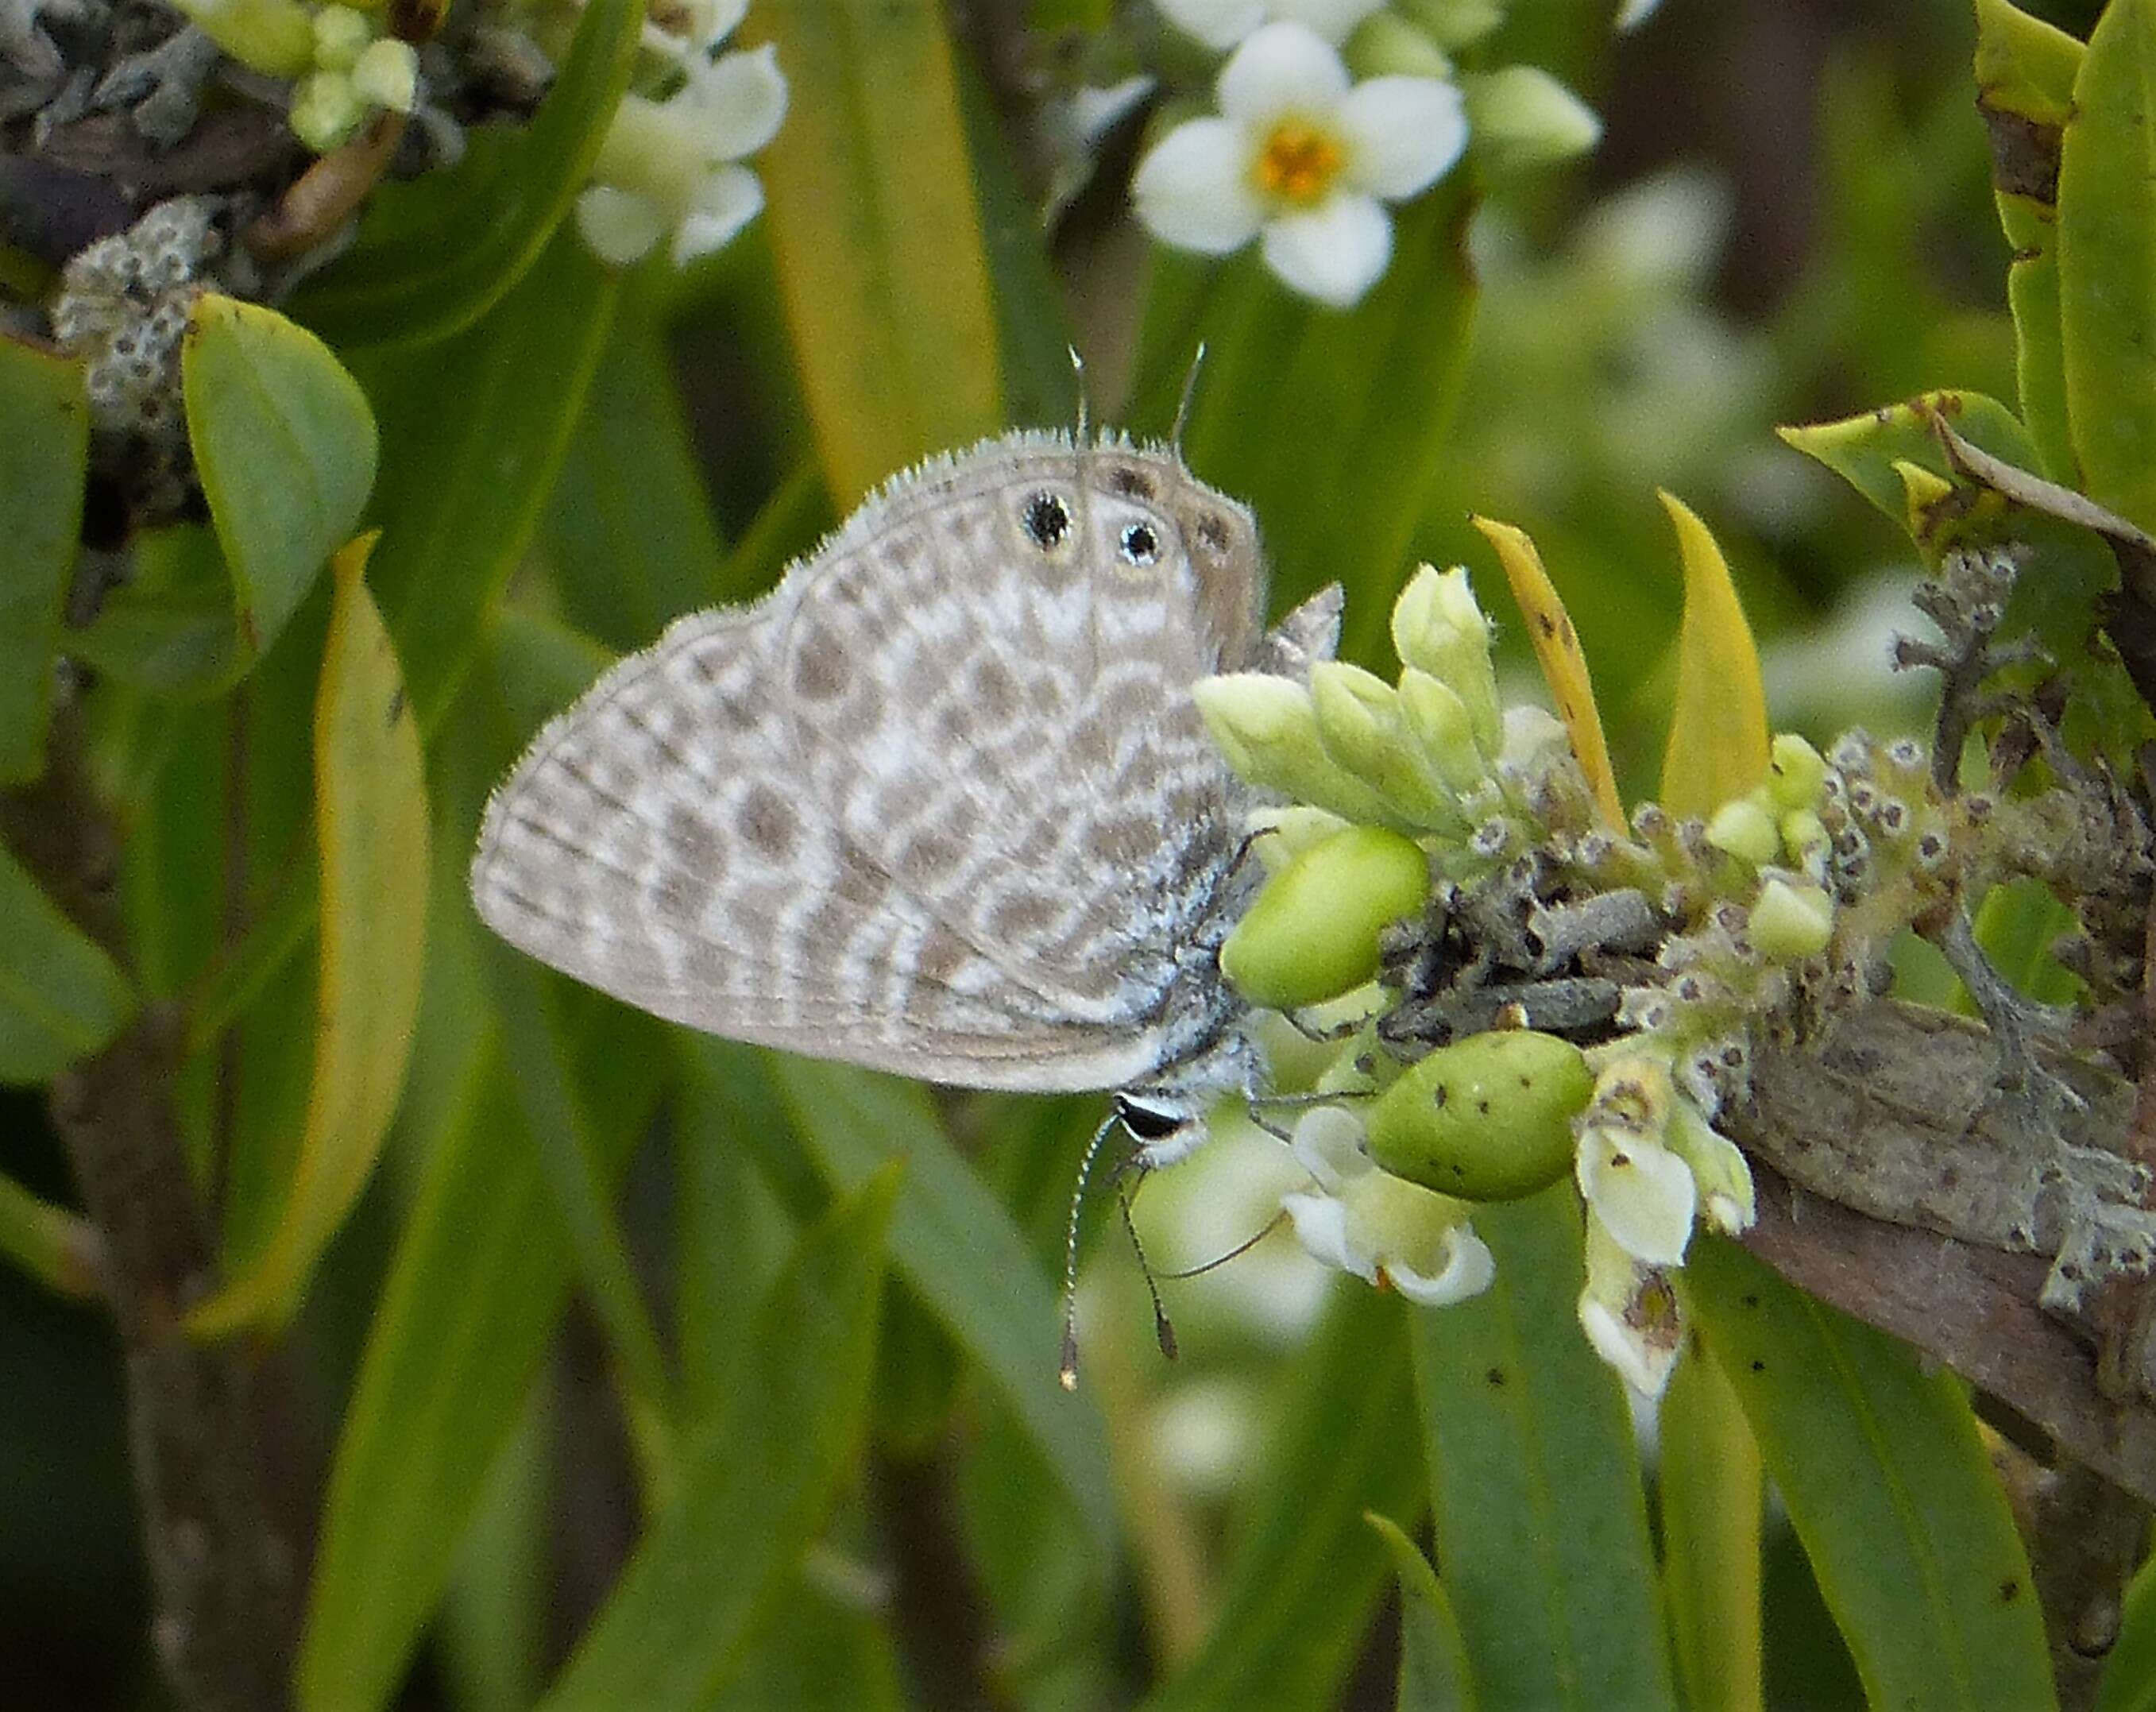 Image of Leptotes